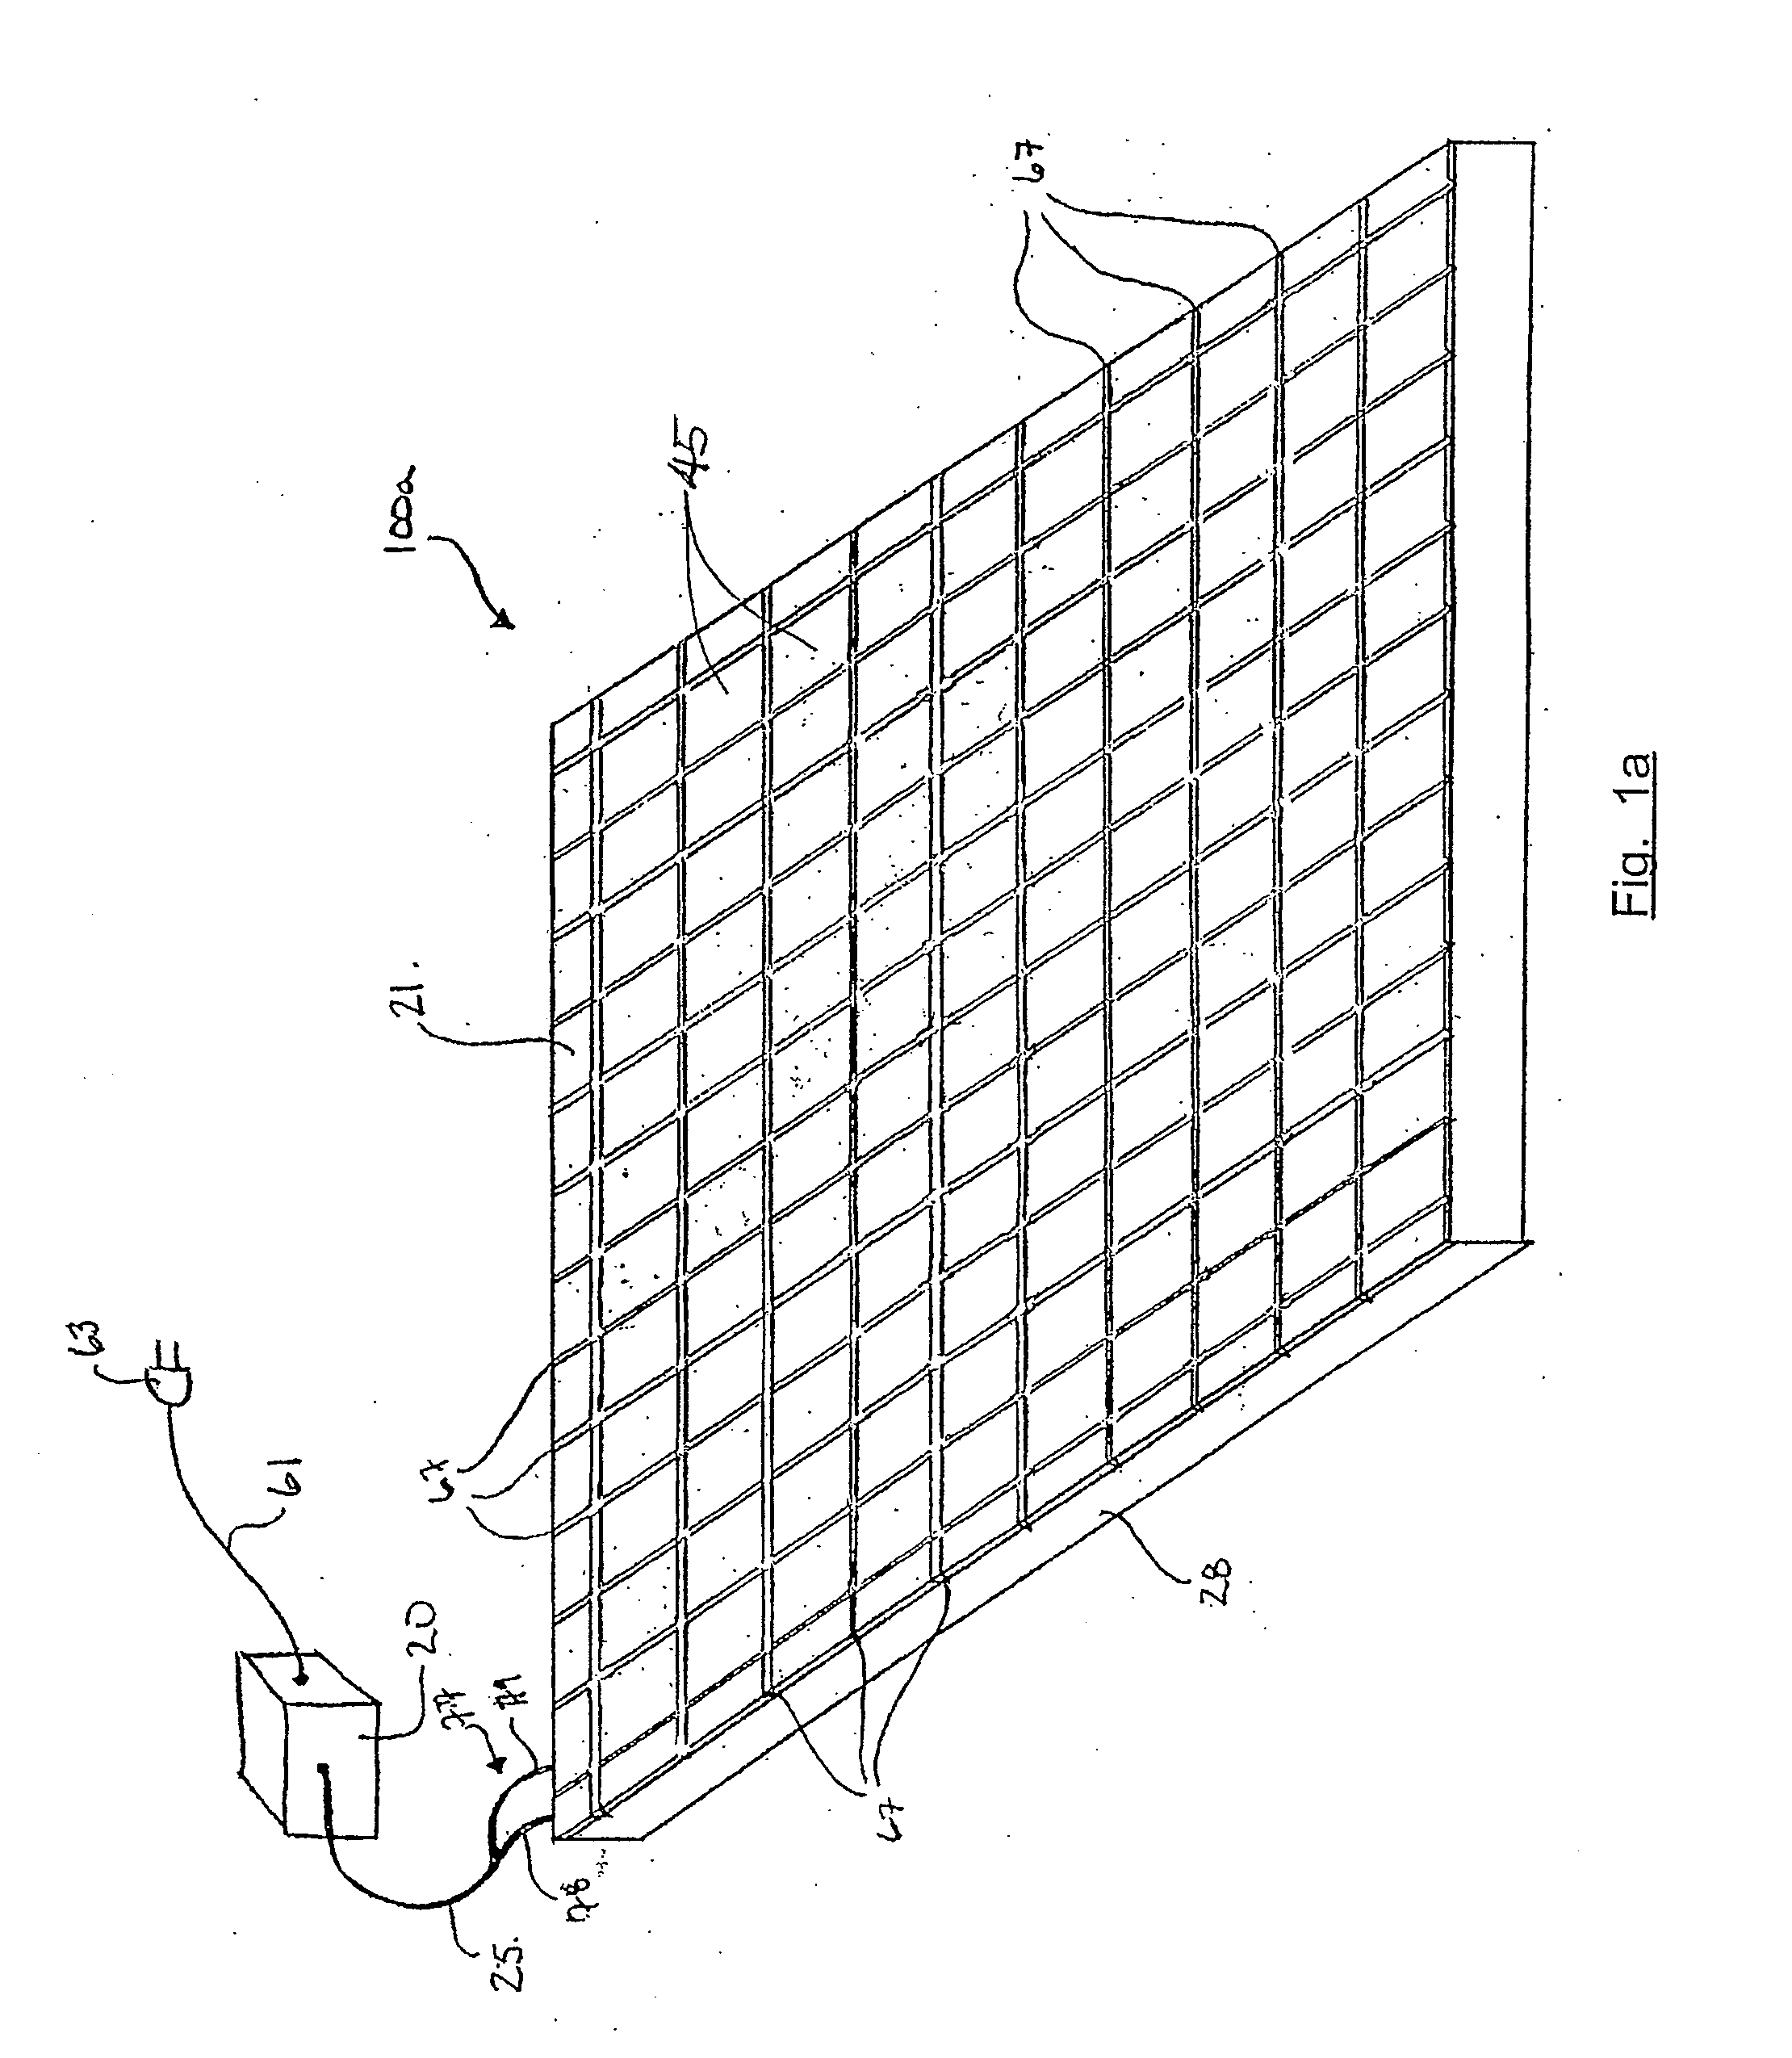 Systems and methods for providing electric power to mobile and arbitrarily positioned devices